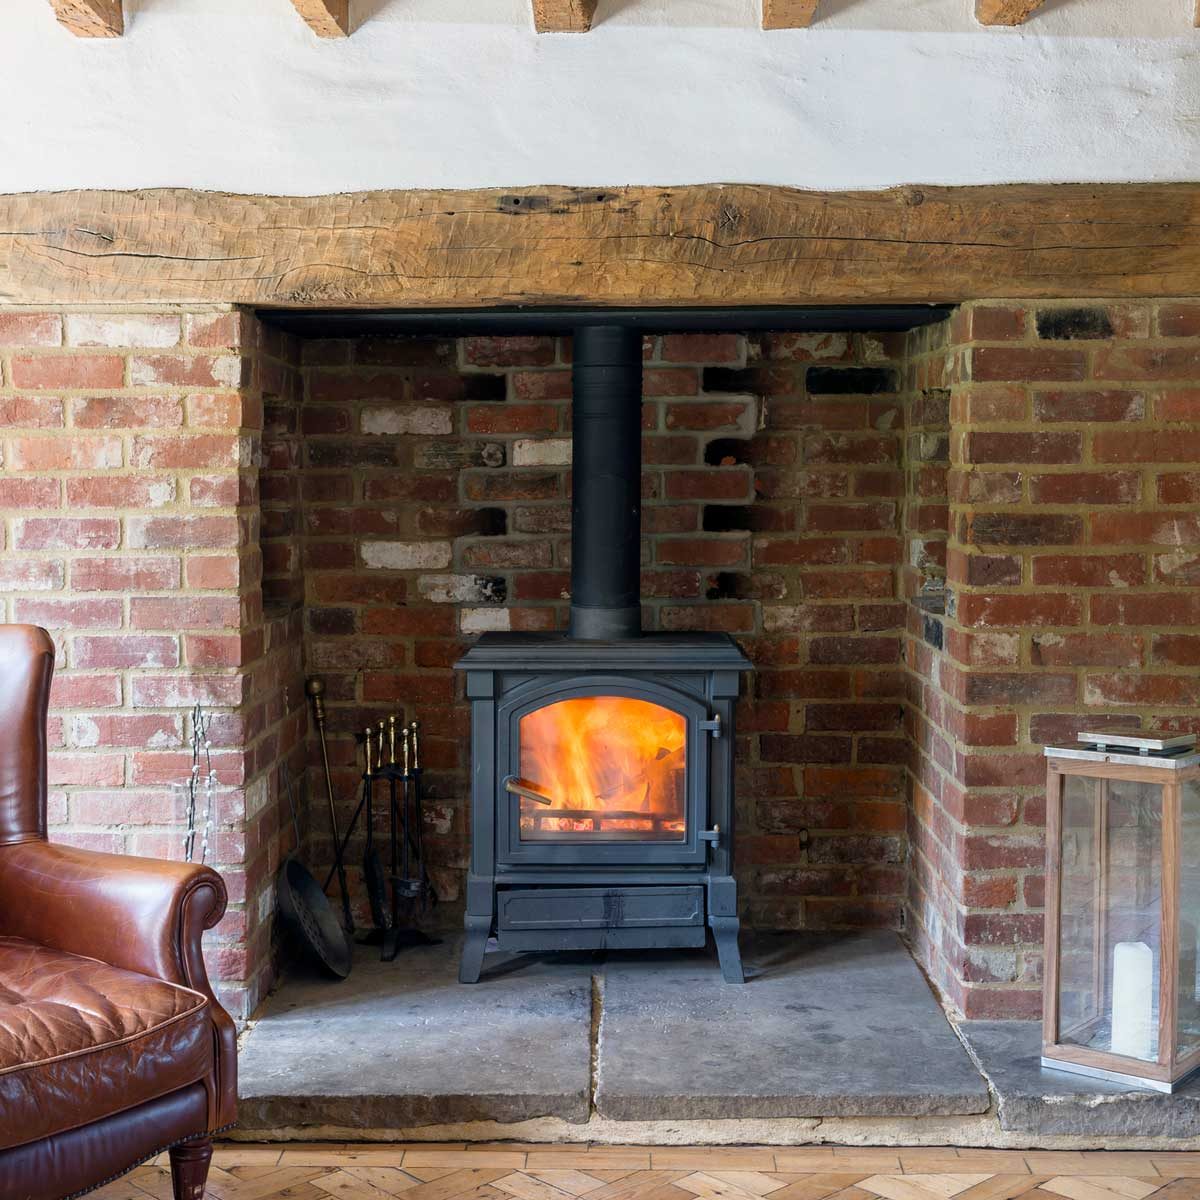 Is a Wood Burning Stove Right for Your Home?